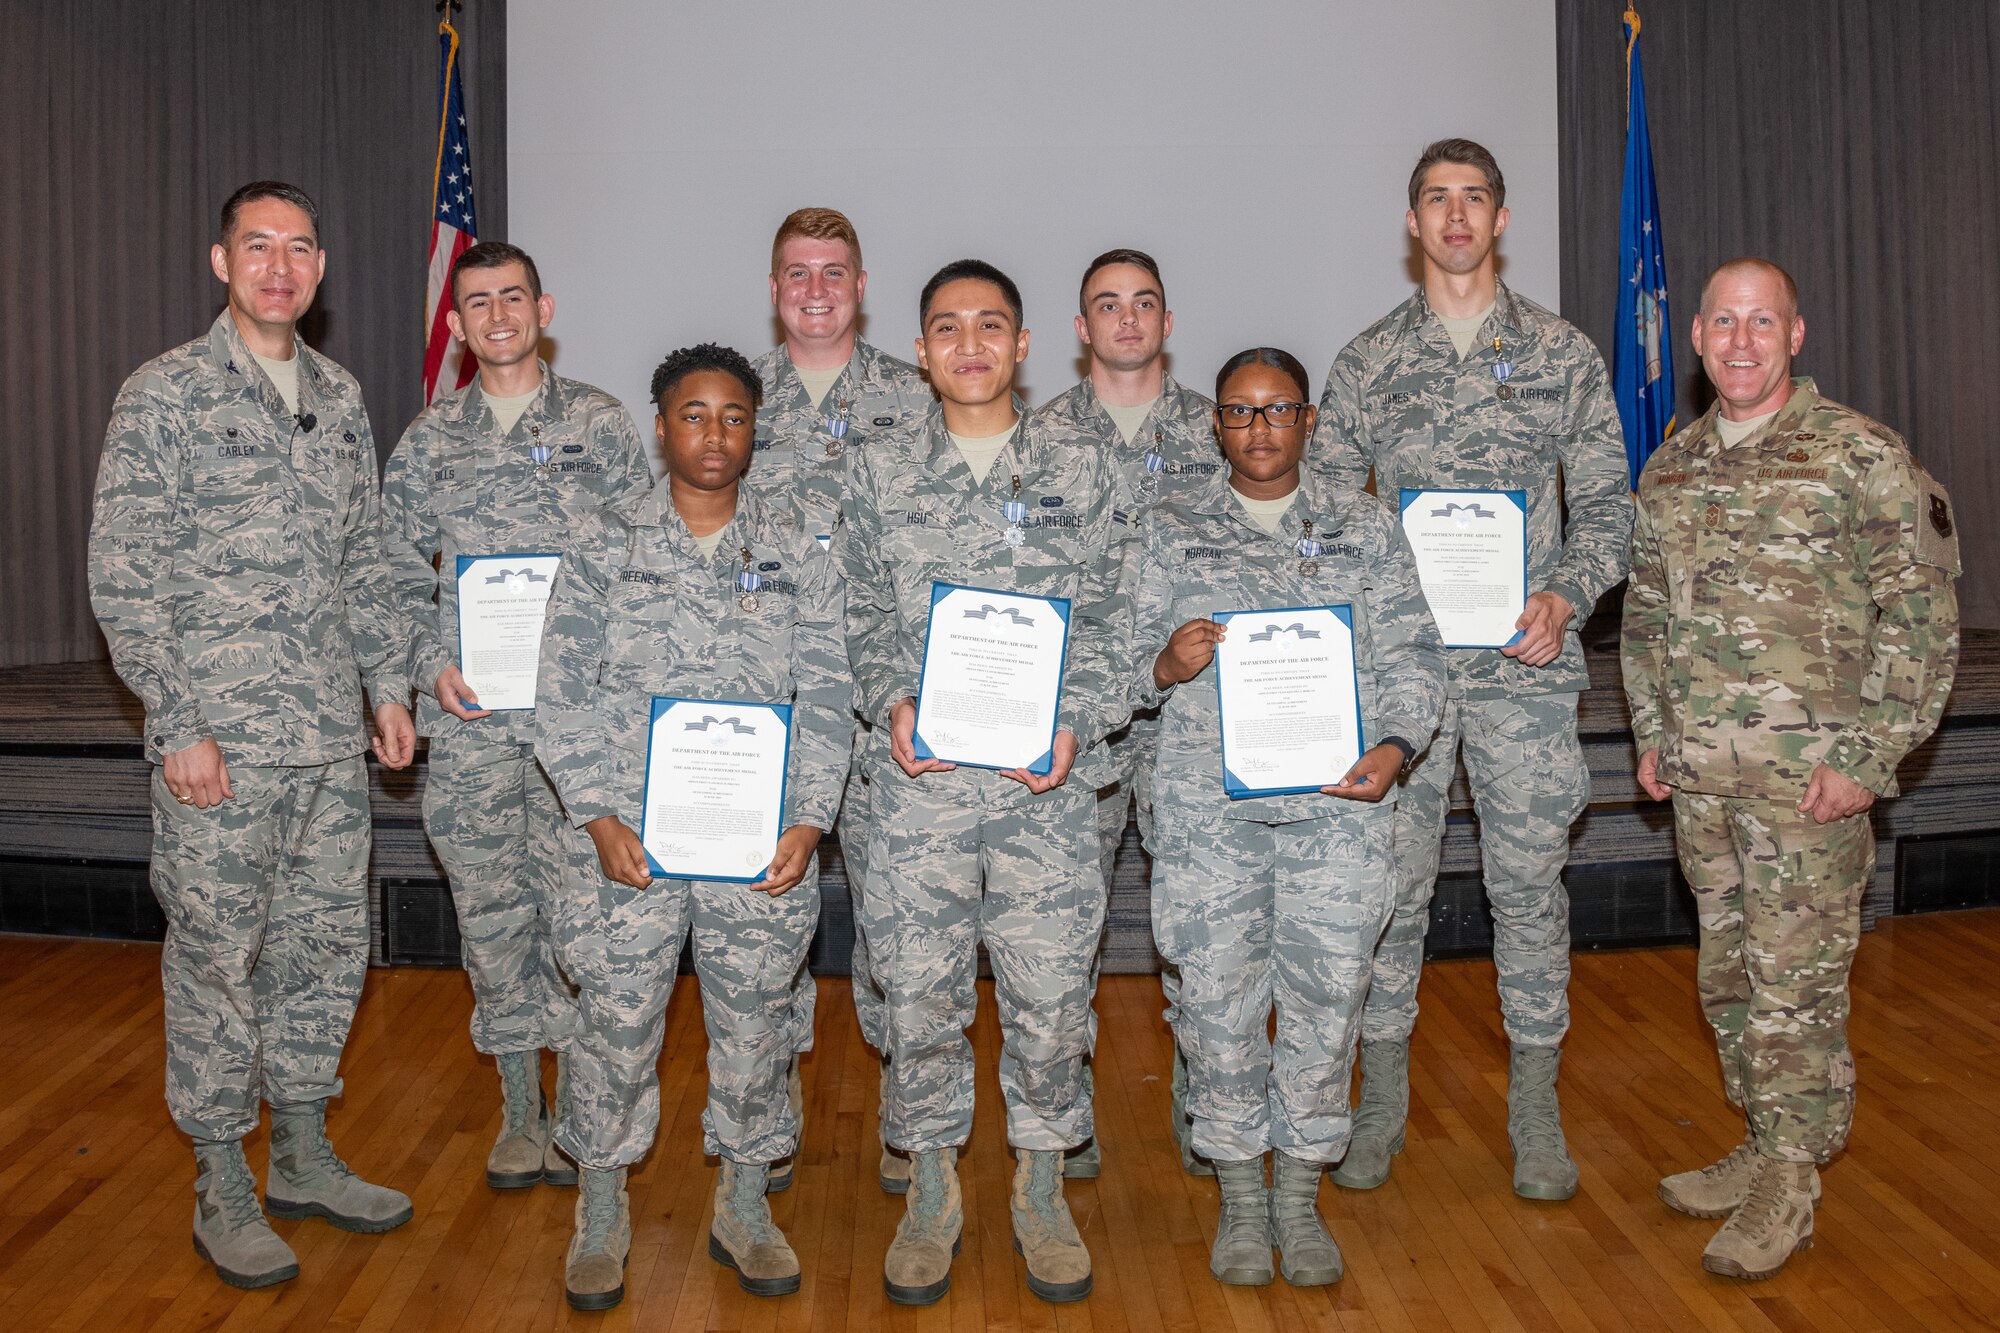 Col. Patrick Carley, 42nd Air Base Wing commander and Chief Master Sgt. Michael Morgan, 42nd ABW command chief, stand on either side of Airman Joshua Bills, Senior Airman Forrest Bivens, Airman 1st Class Brandon Hedelund, Airman 1st Class Christopher James, Airman 1st Class Deja Freeney, Airman 1st Class Kobi Hsu, Airman 1st Class Keivona Morgan, Maxwell Honor Guardsmen, for a group photo after presenting them Air Force Achievement Medals, July 18, 2019, Maxwell Air Force Base, Alabama. The group of Maxwell Honor guardsmen were bestowed the medals for assisting a local woman when her garage suddenly caught fire. (U.S. Air Force photo by Cassandra Cornwall)